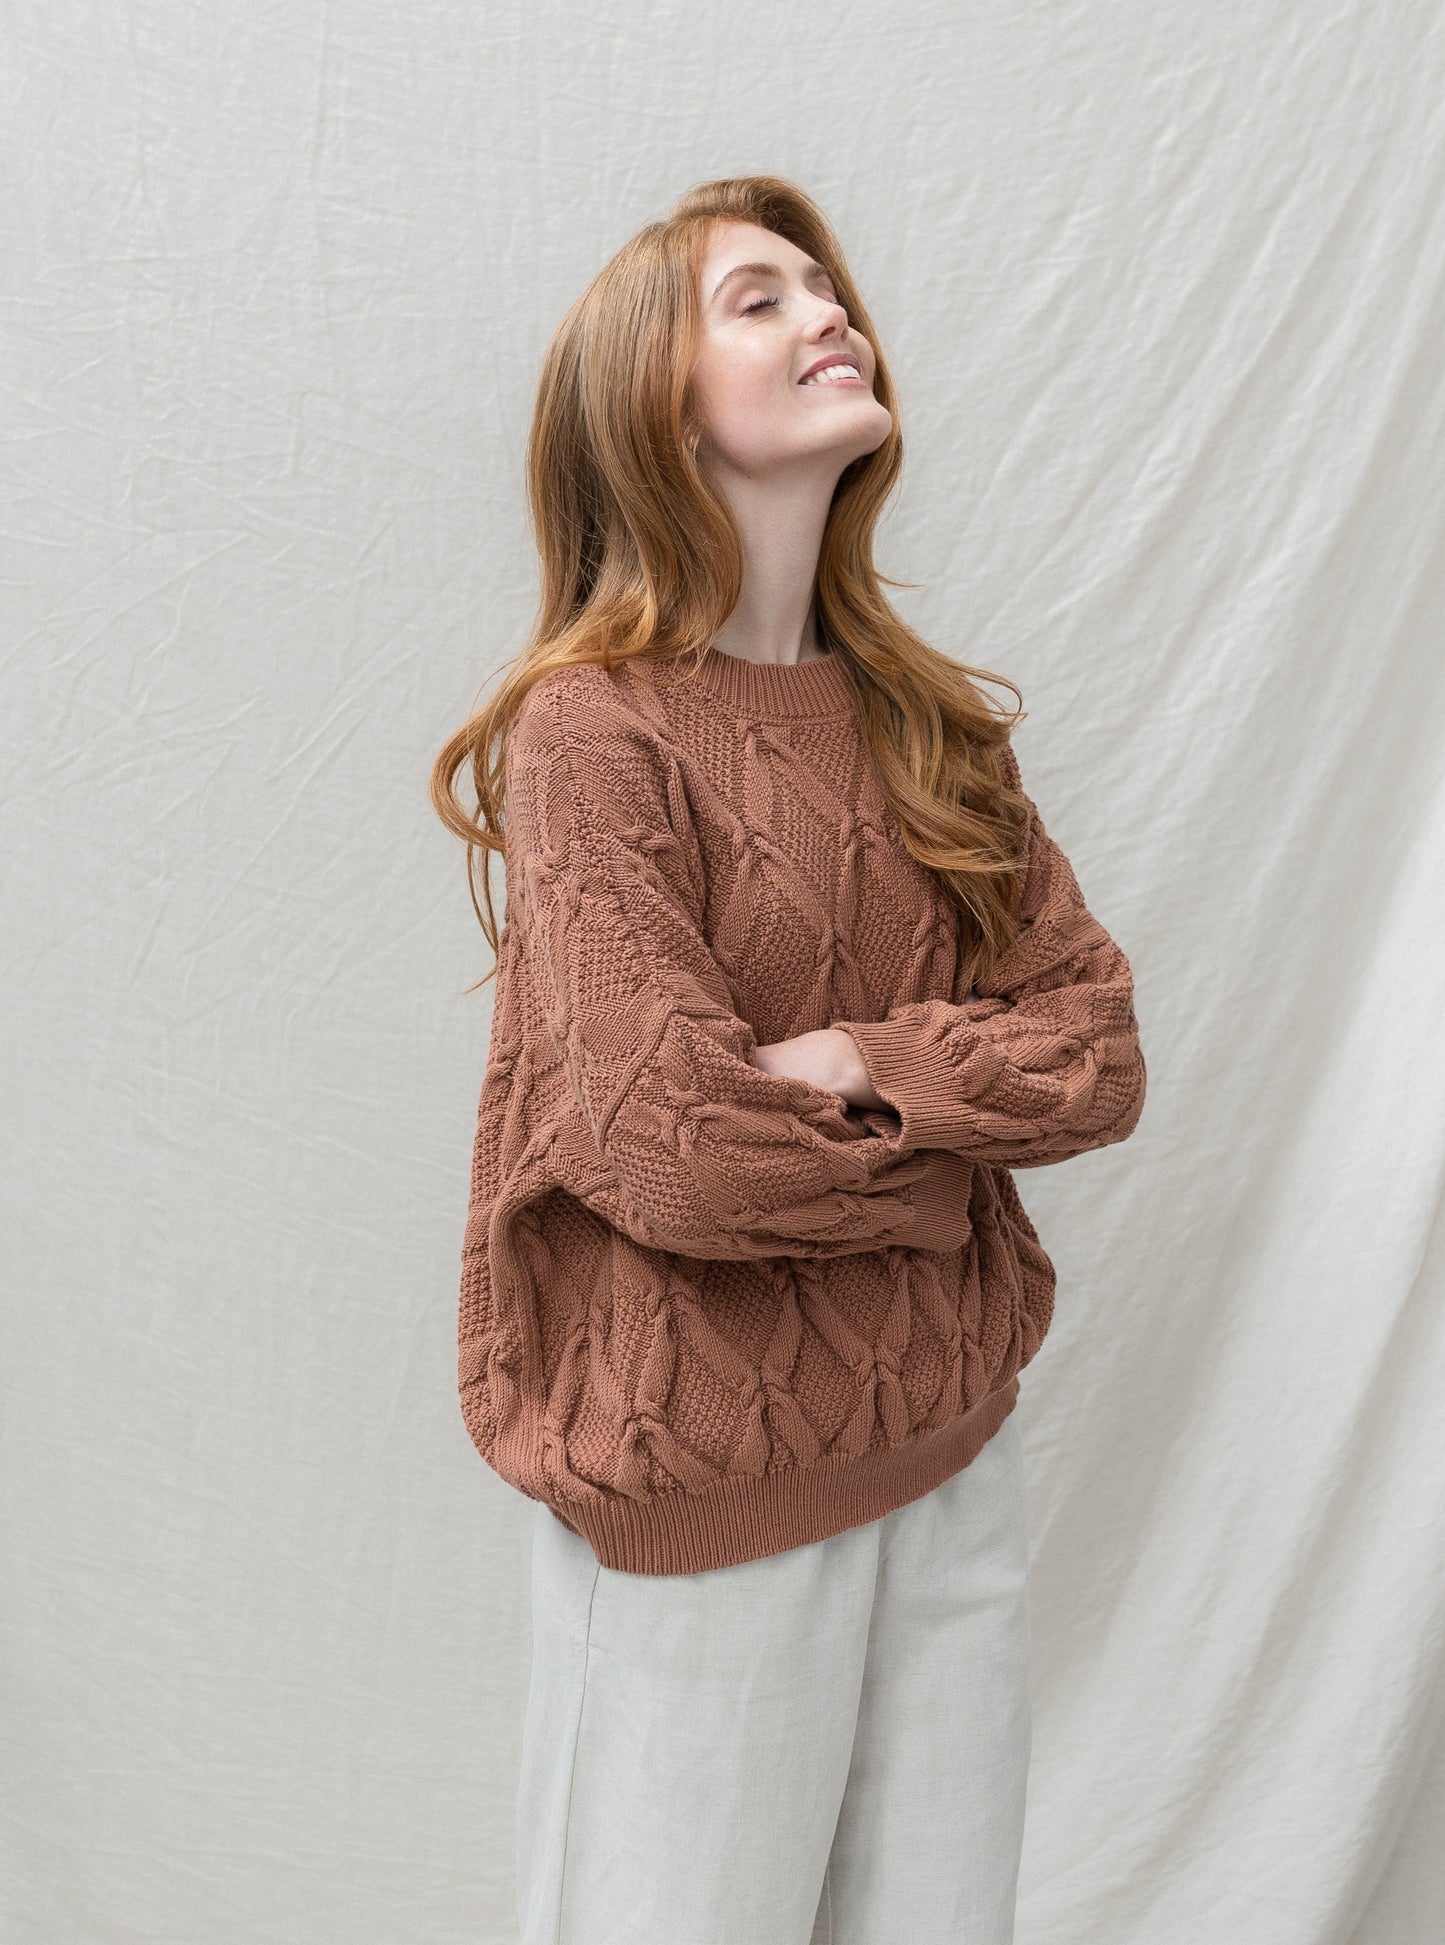 Organic Cotton Cable Sweater in Rosewood Apricot